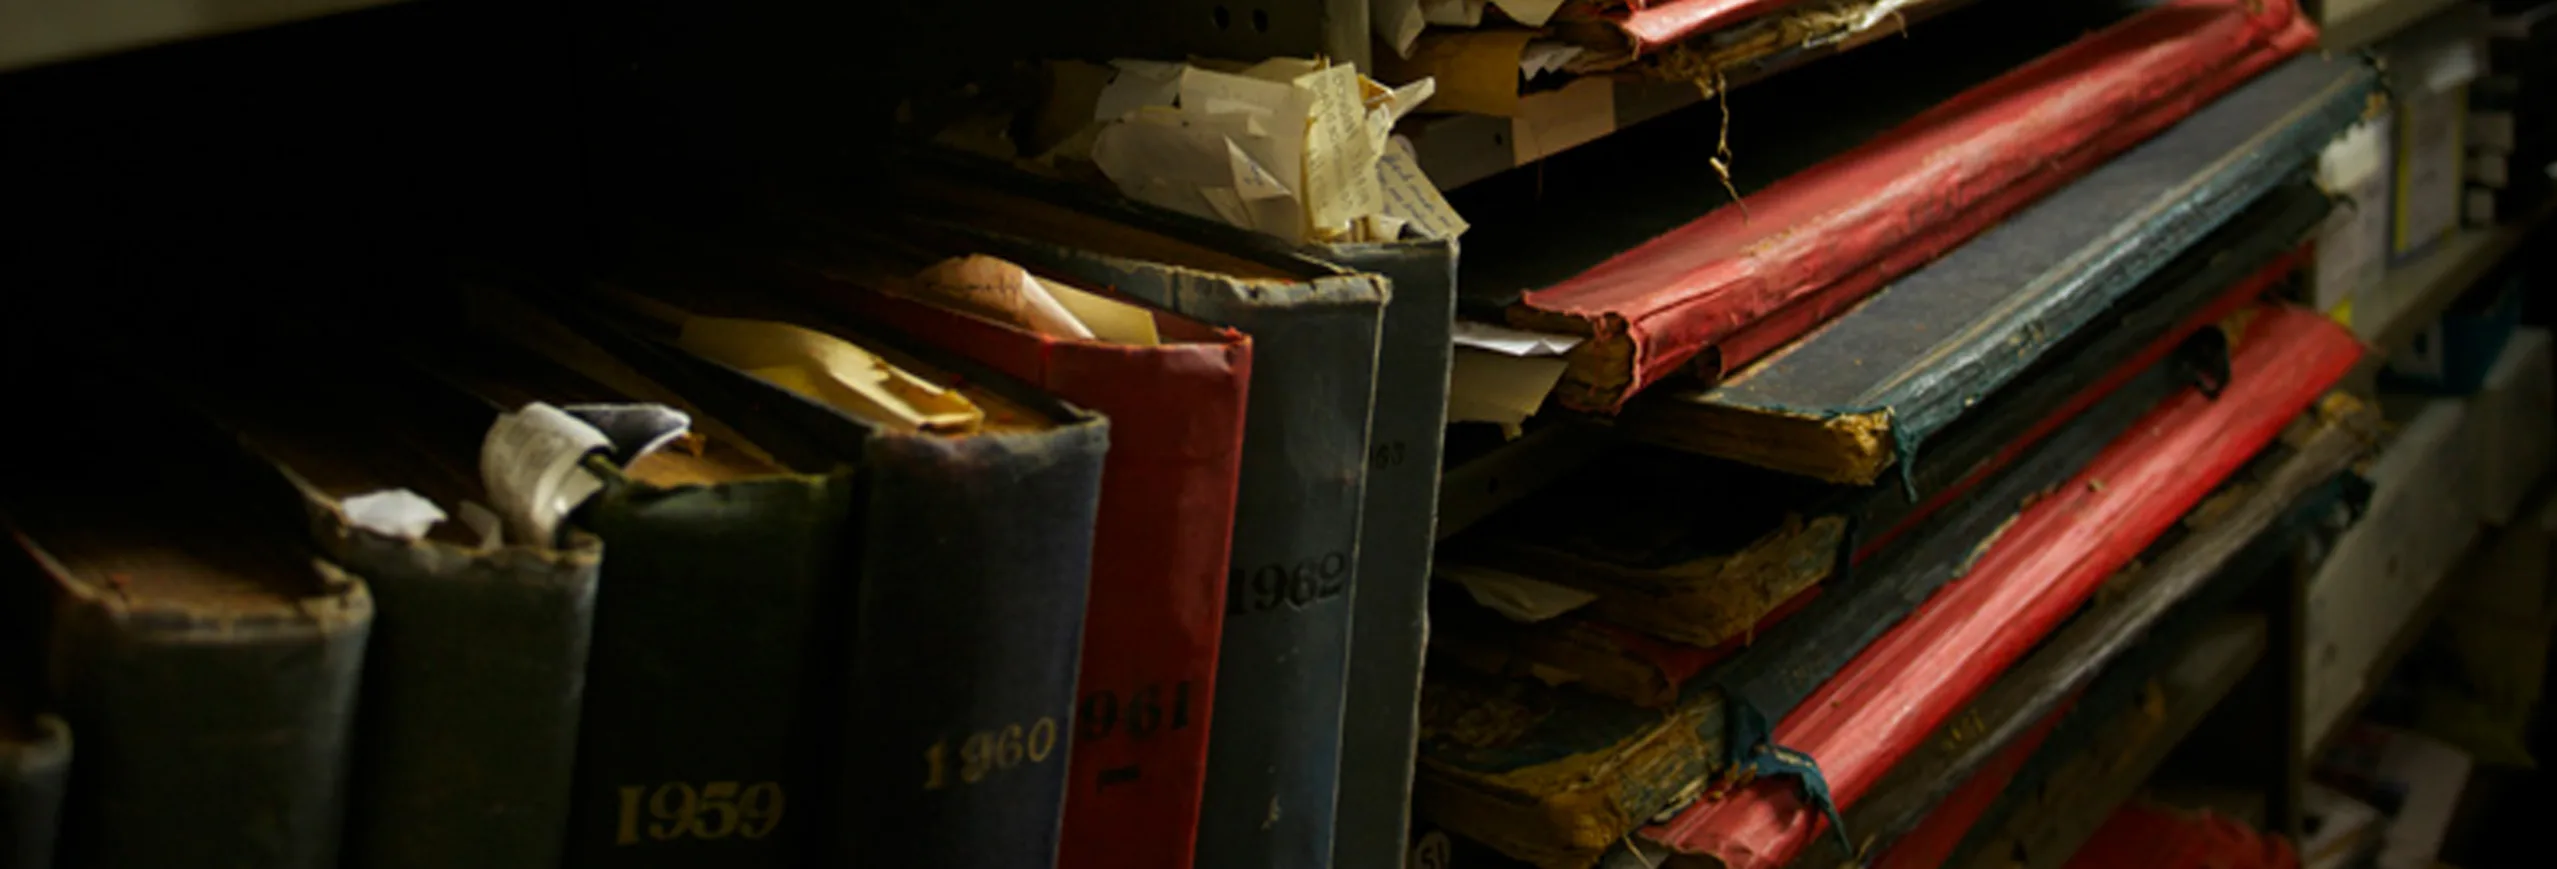 Old, vintage, historical book archives at the Morwell Historical Society